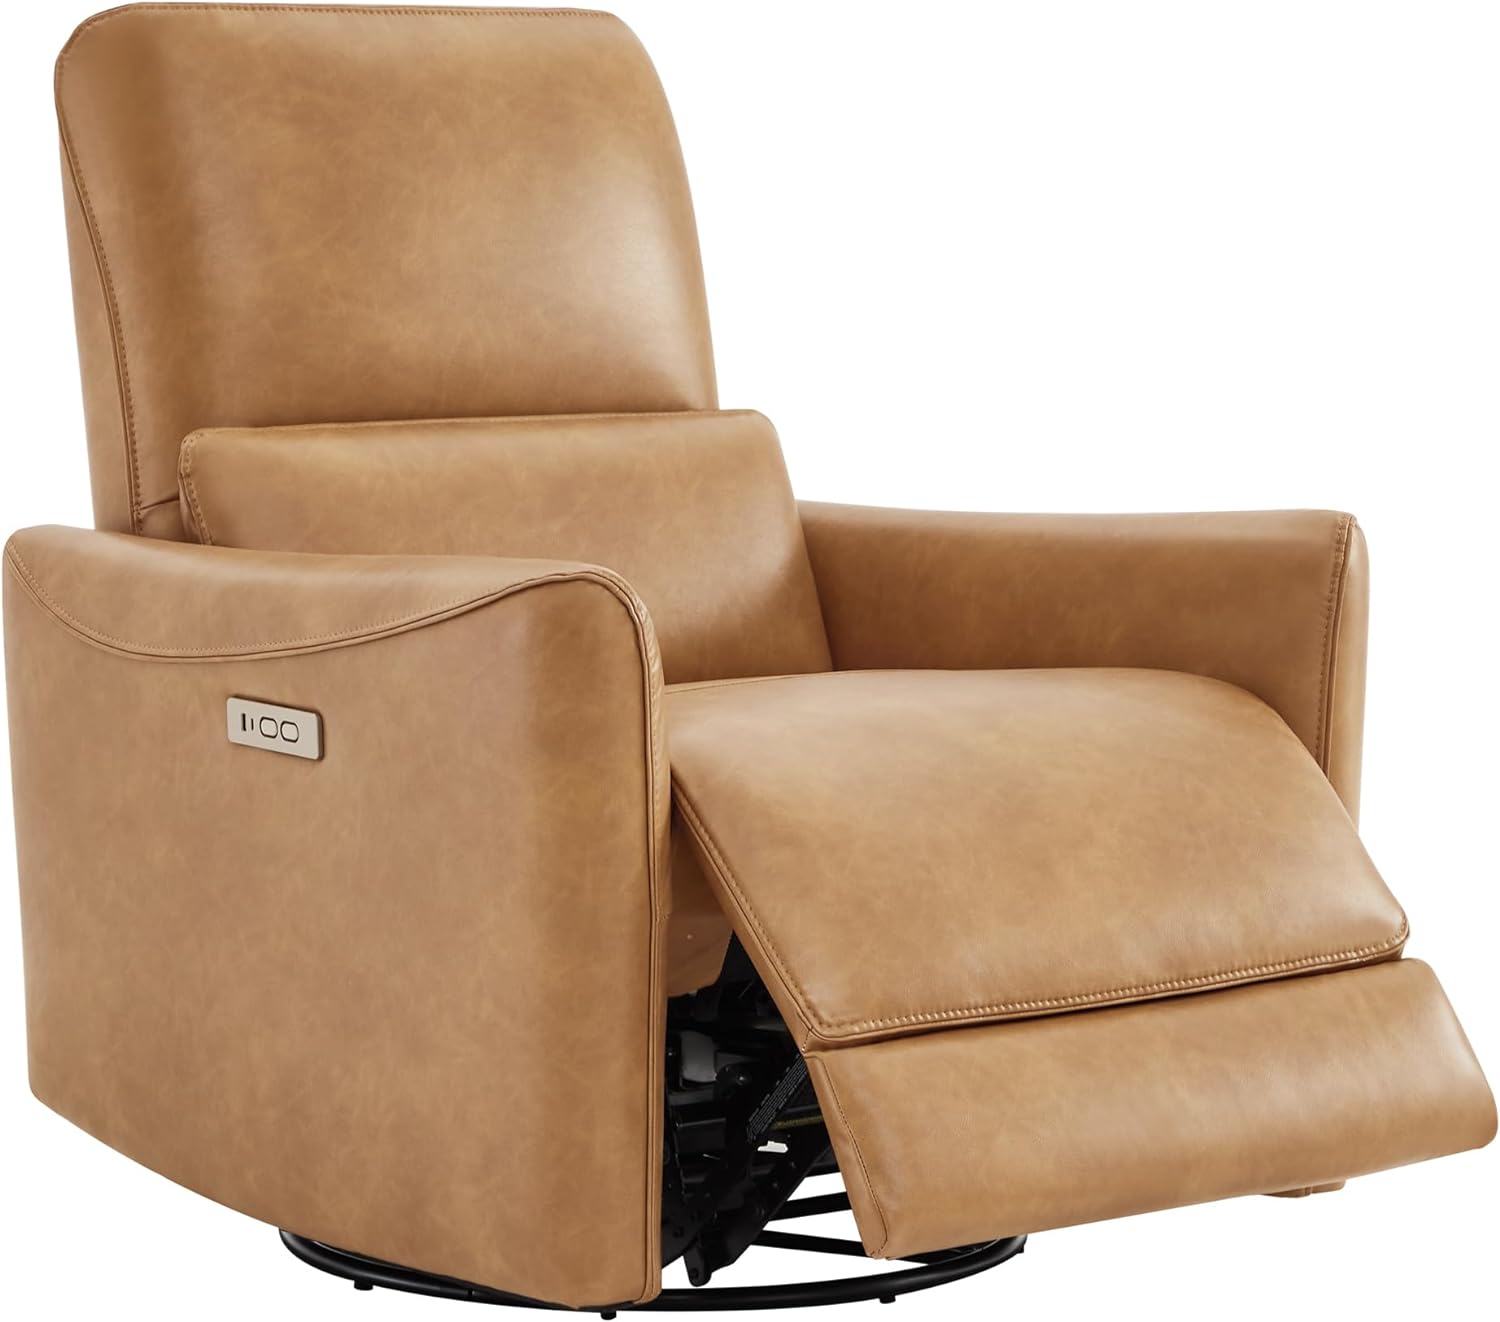 Get the CHITA Power Recliner Chair Now - Special Discounts Available!